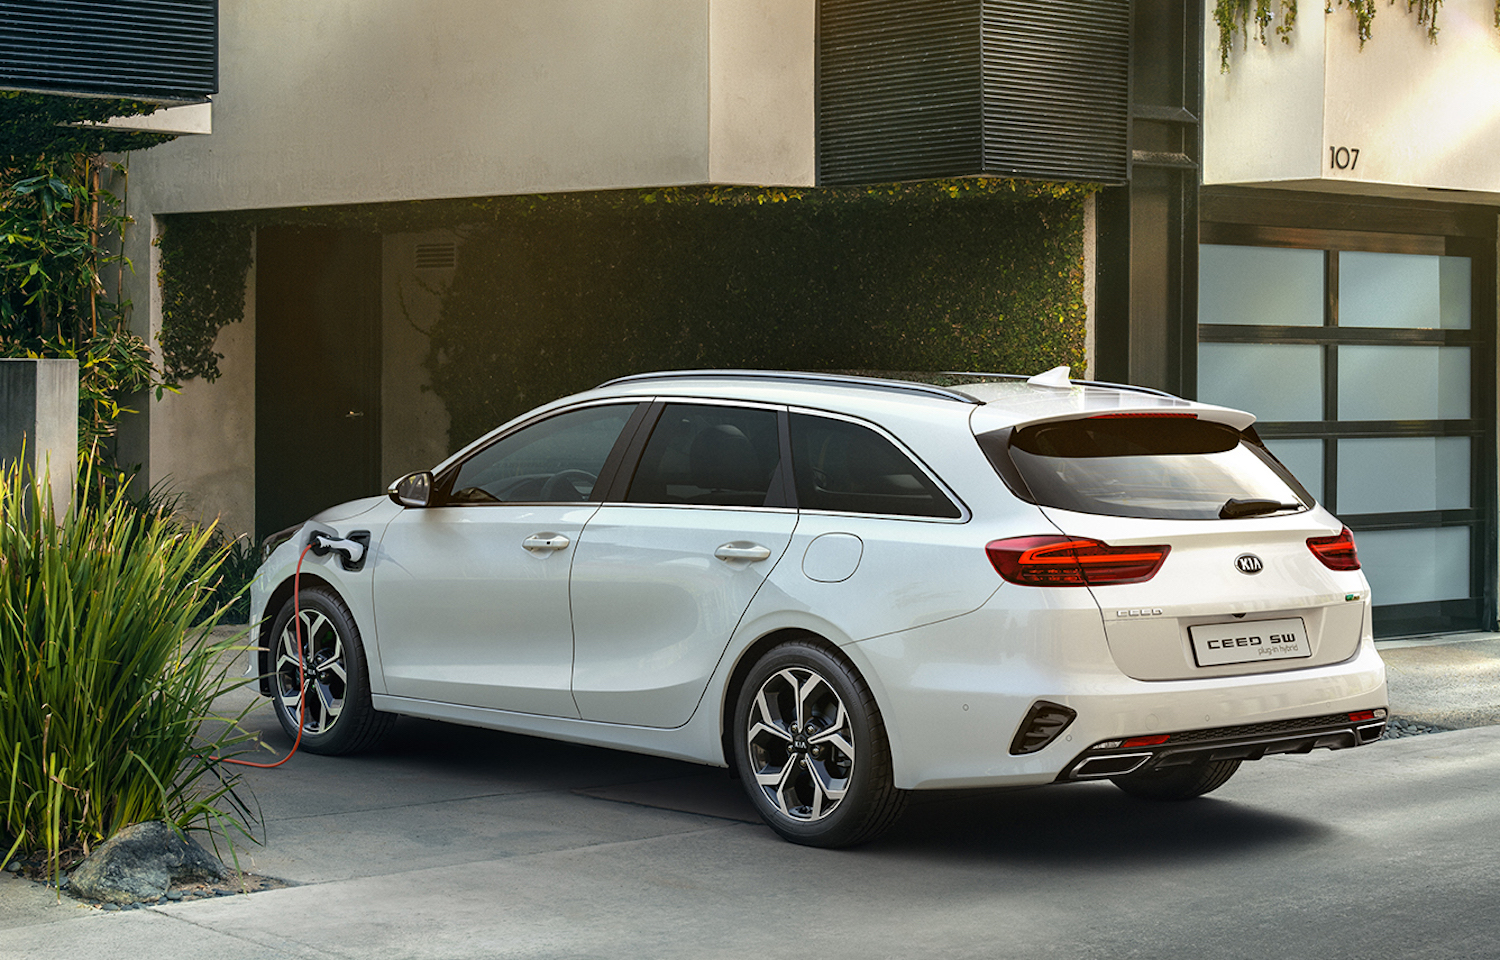 KIA XCEED ET CEED SW PLUG IN HYBRID 2020 DES HYBRIDES RECHARGEABLES ACCESSIBLES AUTO MAG